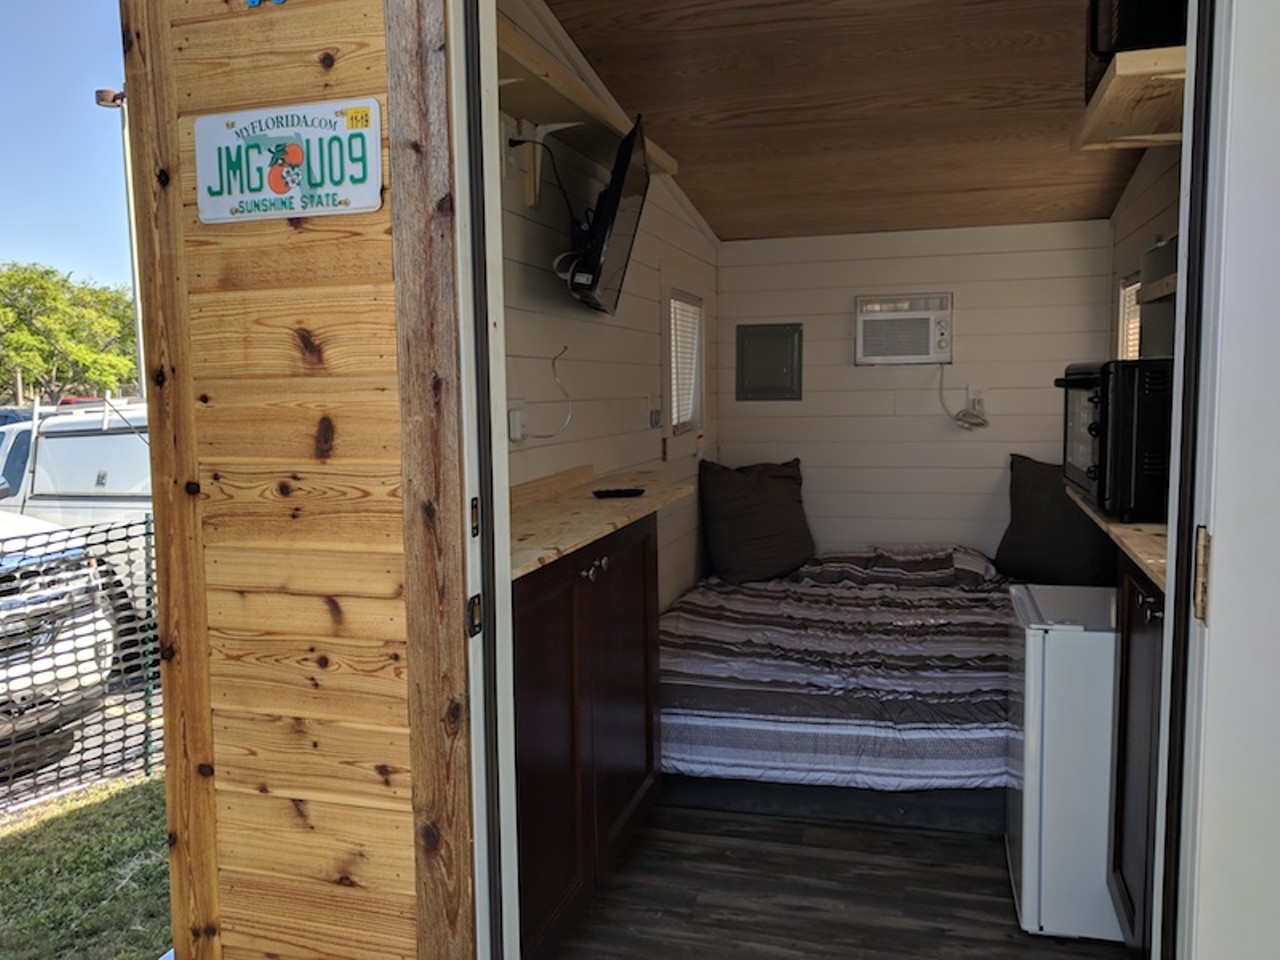 All the little houses we saw at St. Petersburg's Tiny Home Festival 2019